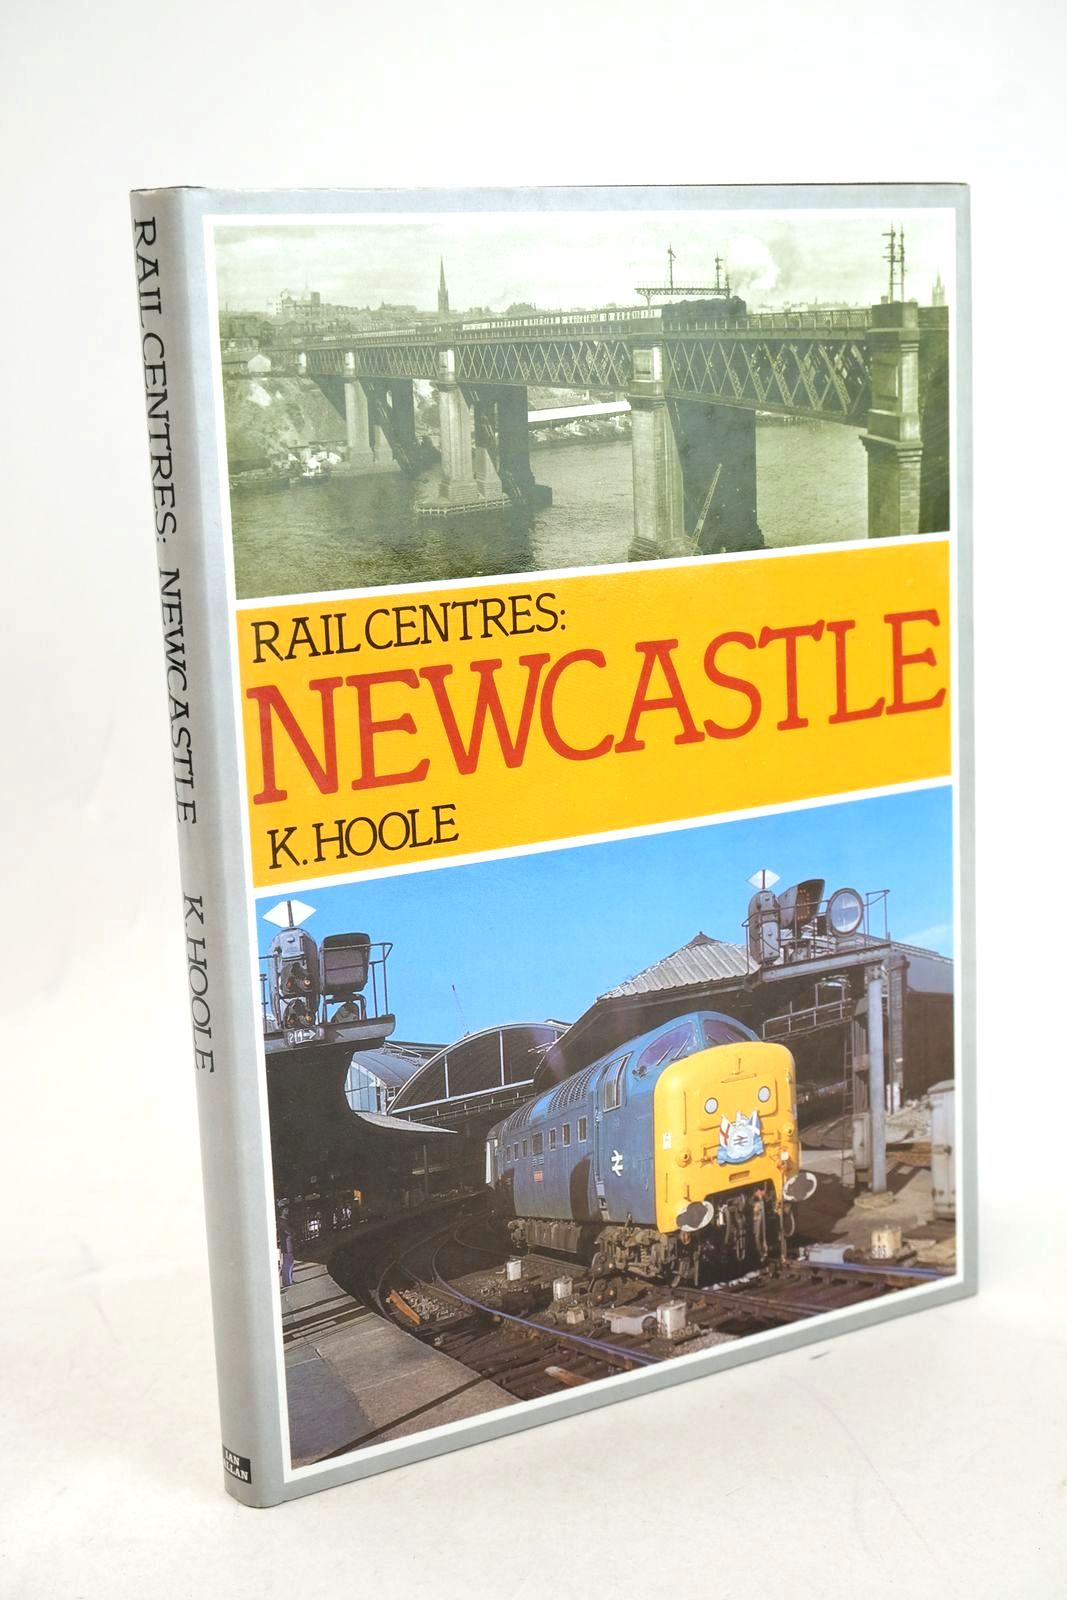 Photo of RAIL CENTRES: NEWCASTLE written by Hoole, K. published by Ian Allan Ltd. (STOCK CODE: 1327447)  for sale by Stella & Rose's Books